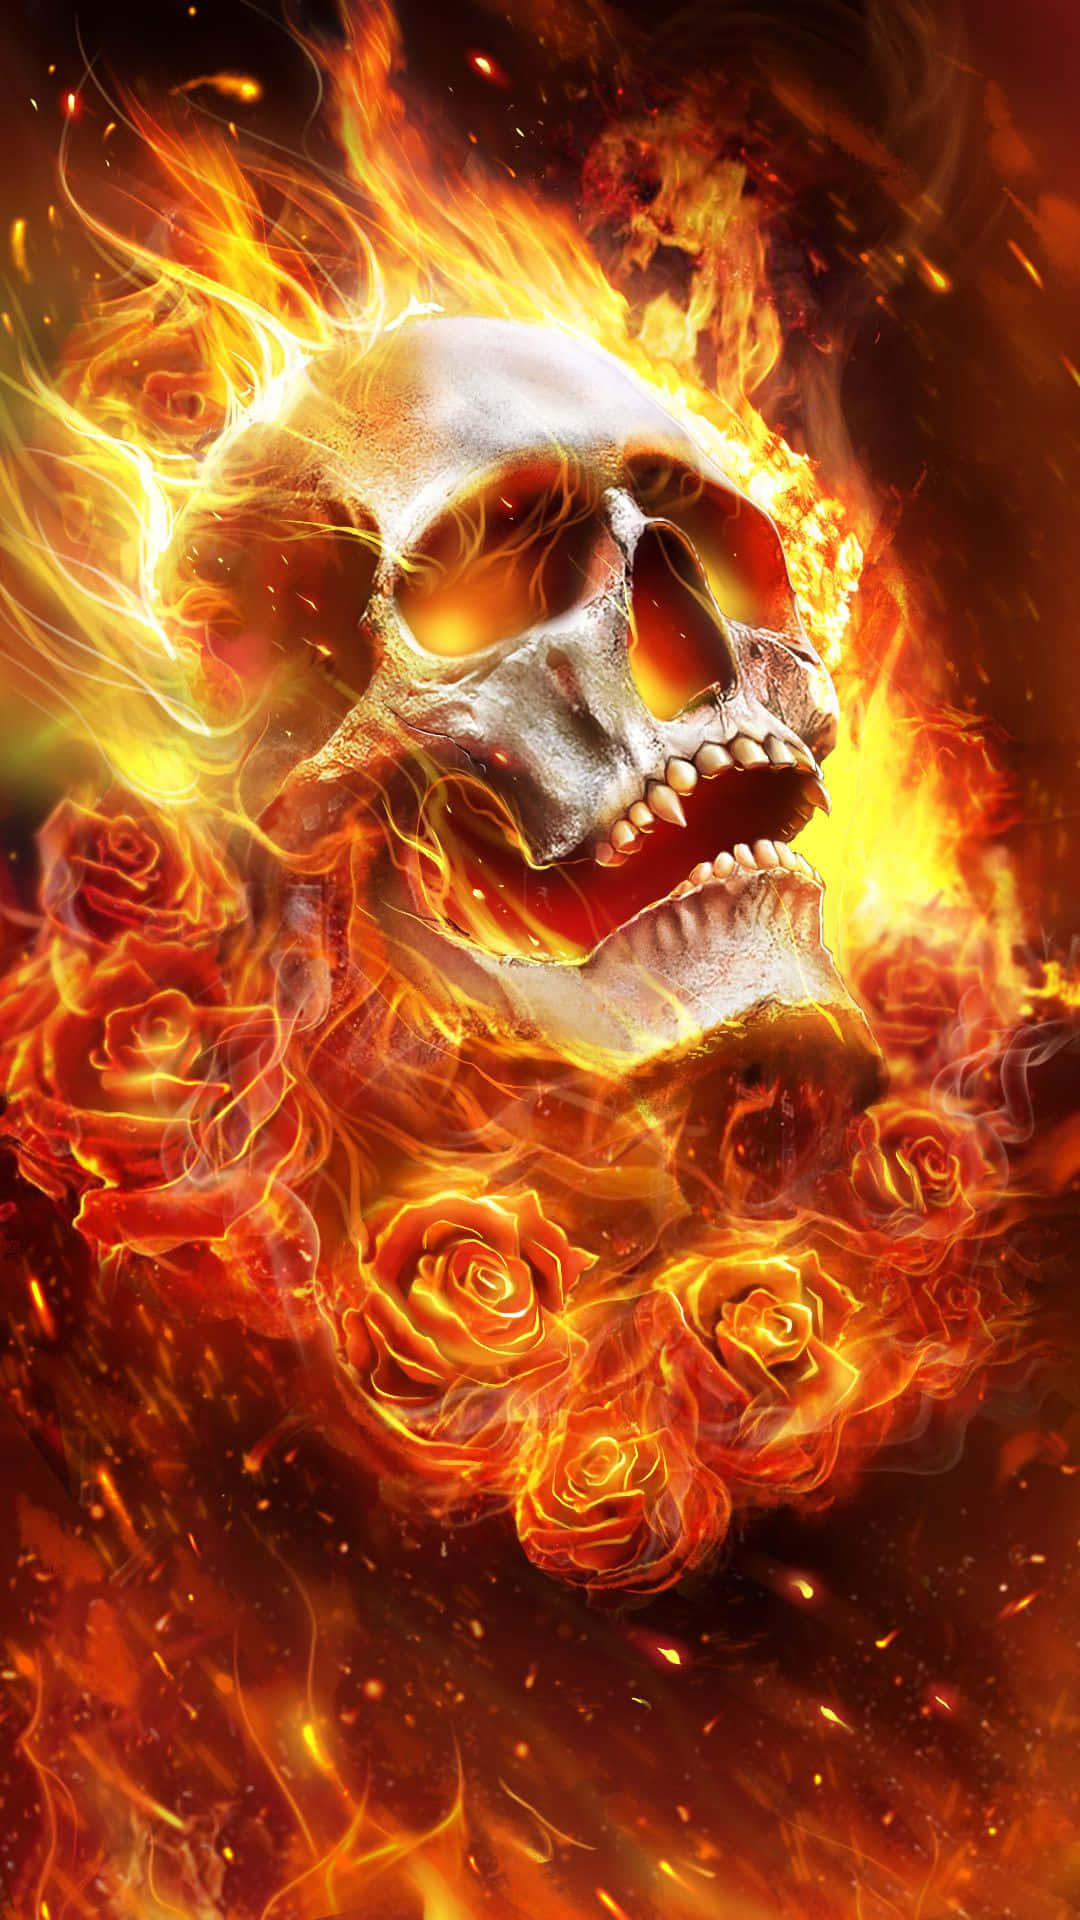 A Skull With Roses In Fire Wallpaper